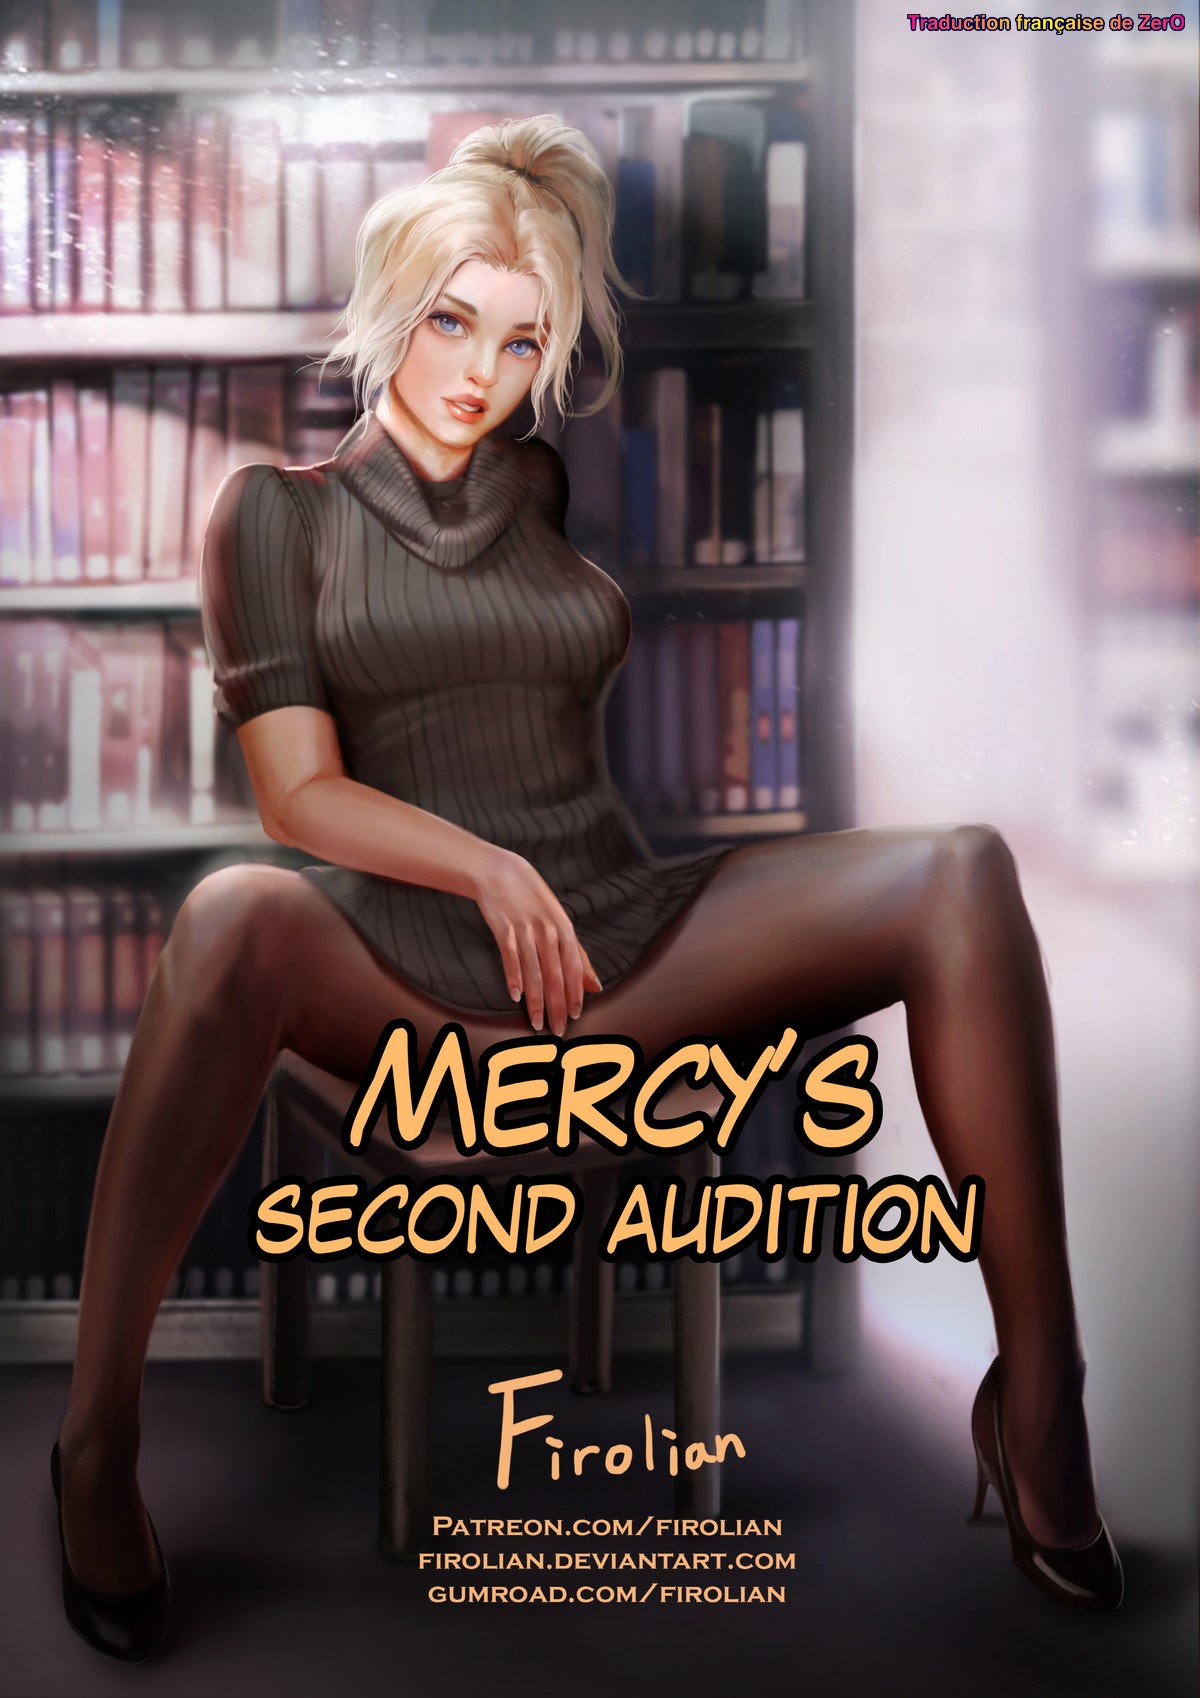 [Firolian] Mercy's second audition [French] Porn Comics